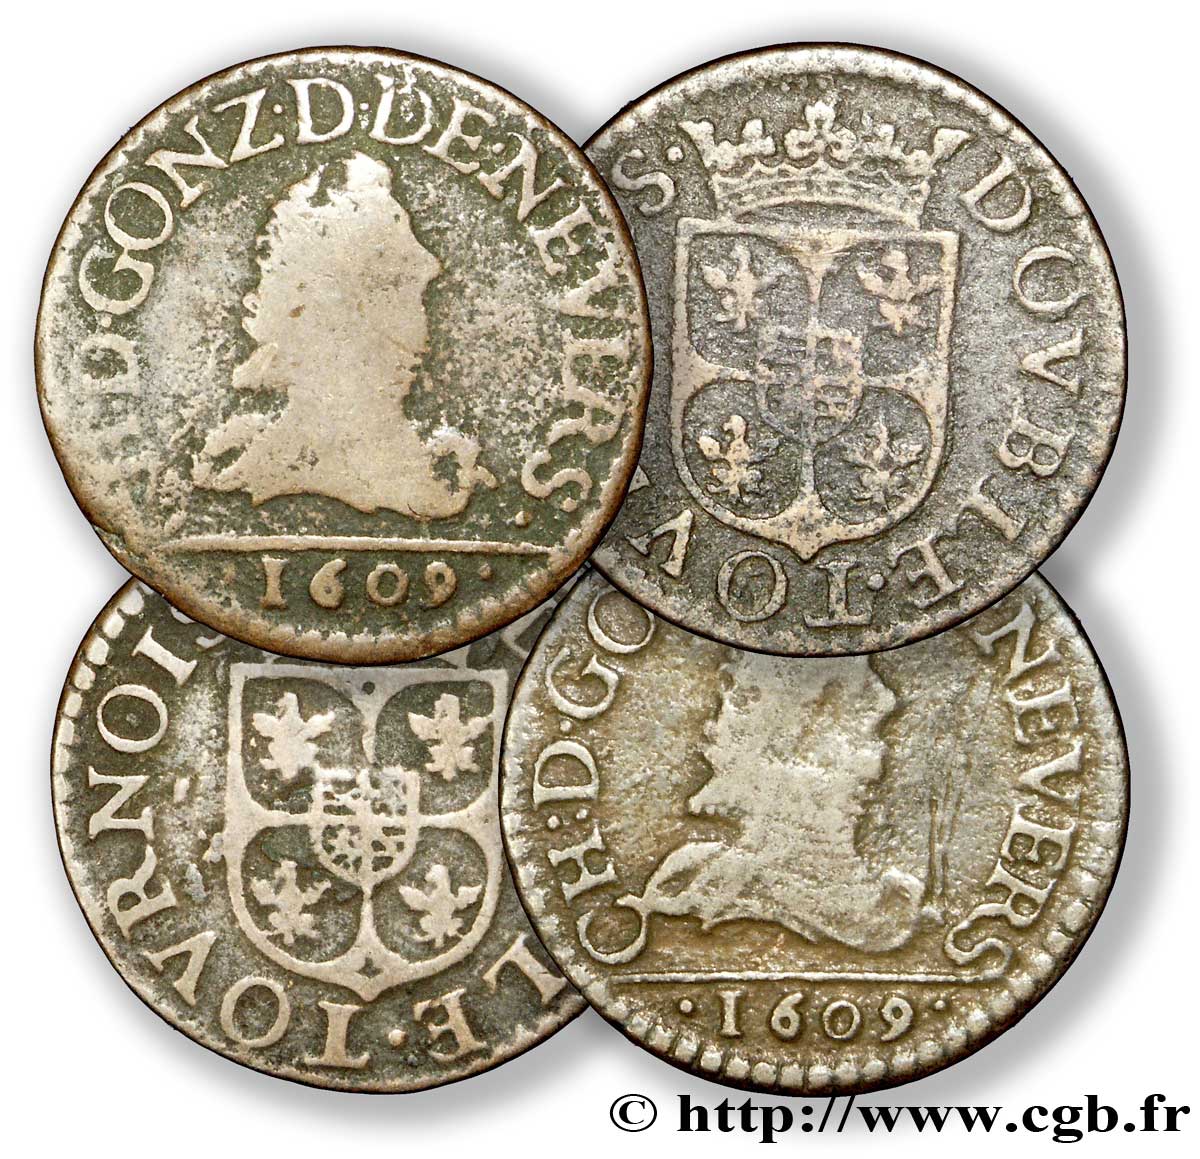 ARDENNES - PRINCIPALITY OF ARCHES-CHARLEVILLE - CHARLES I GONZAGA Lot de 4 doubles tournois, type 3 XF/AU